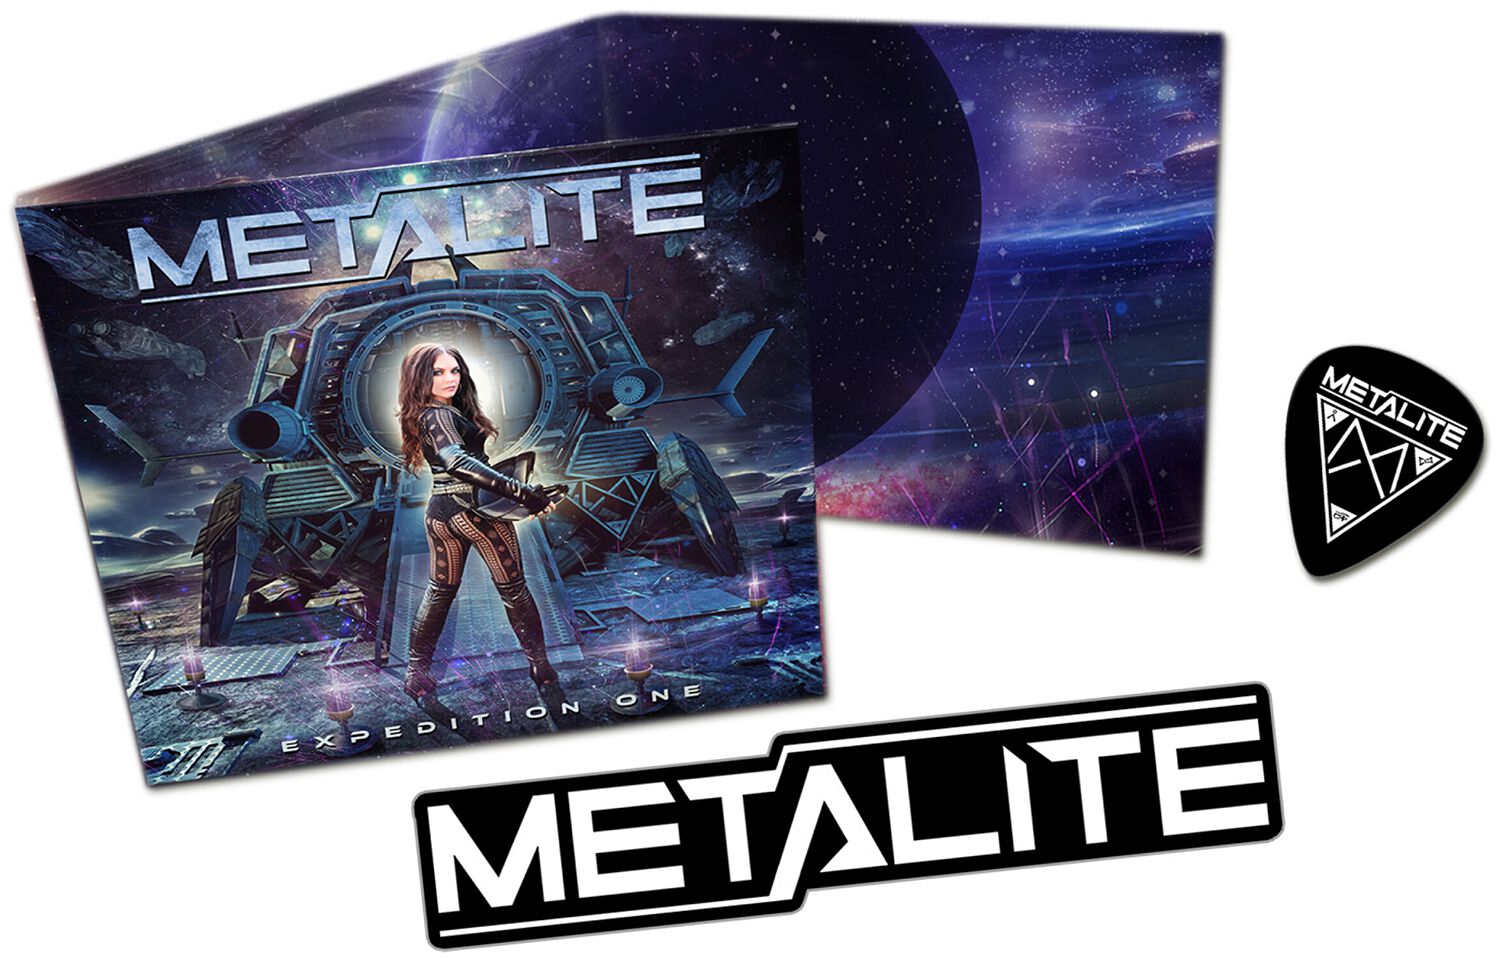 Metalite Expedition one CD multicolor